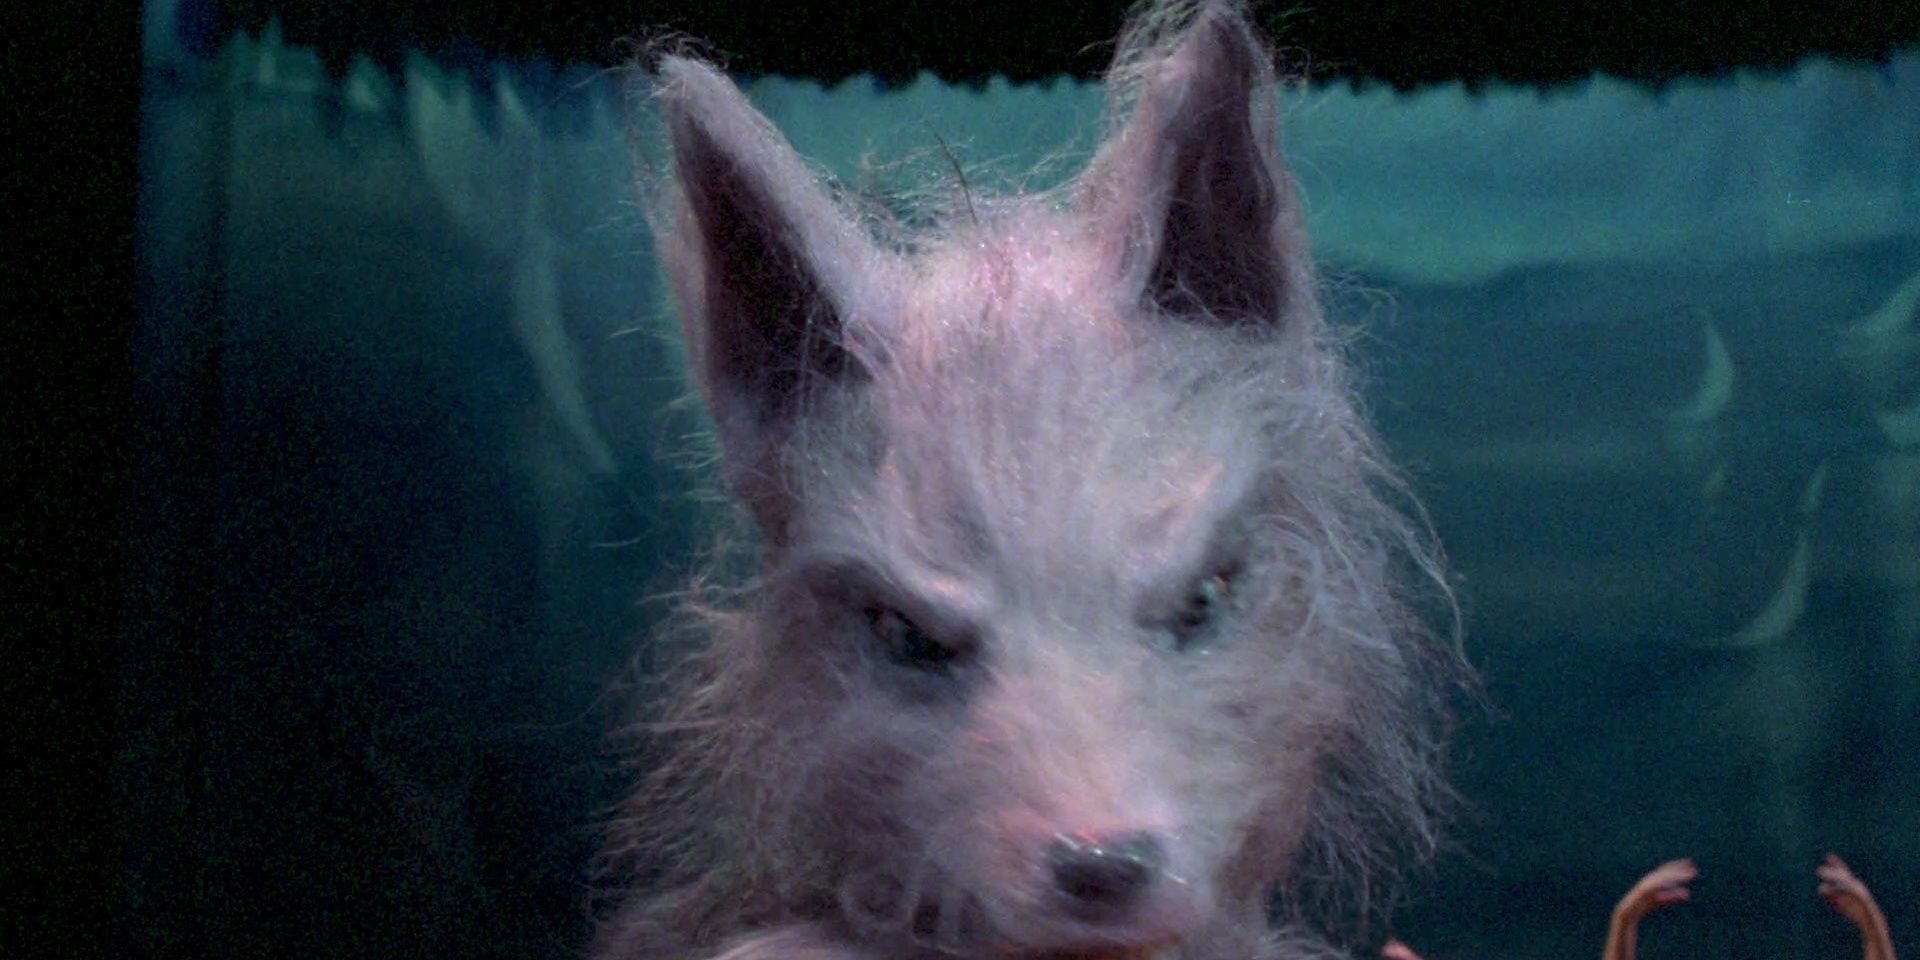 One of the werecreatures in the howling 3